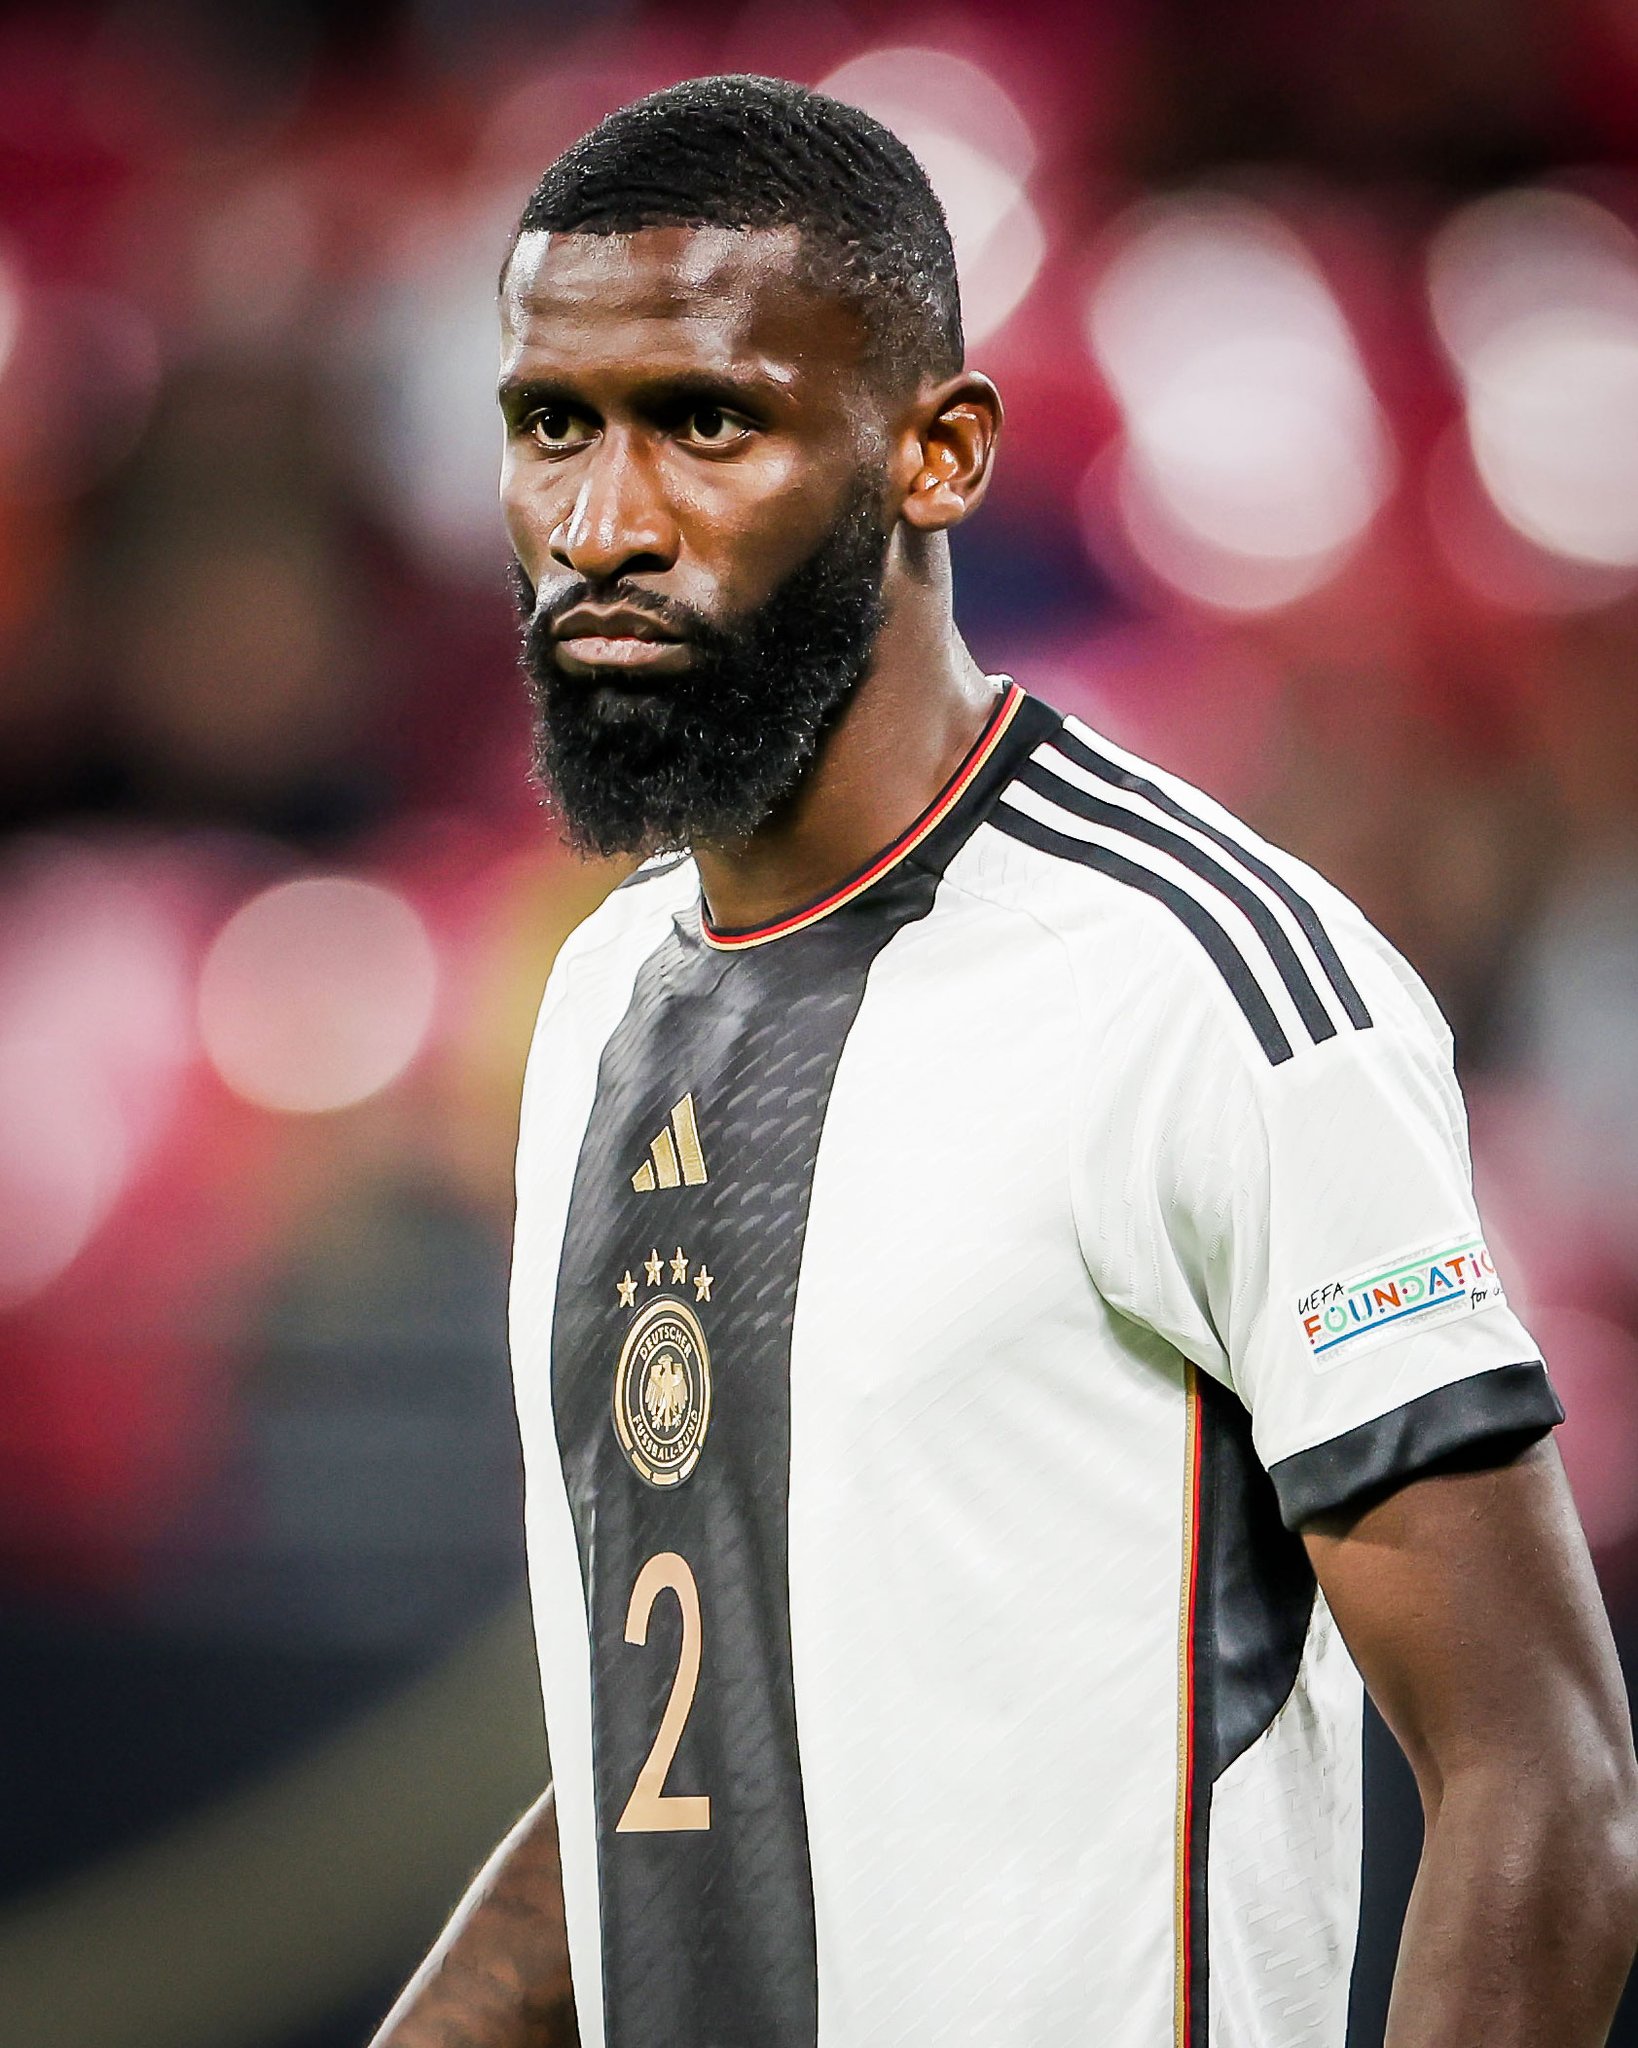 Rüdiger donates all expected World Cup earnings to help 11 children undergo surgery in Sierra Leone